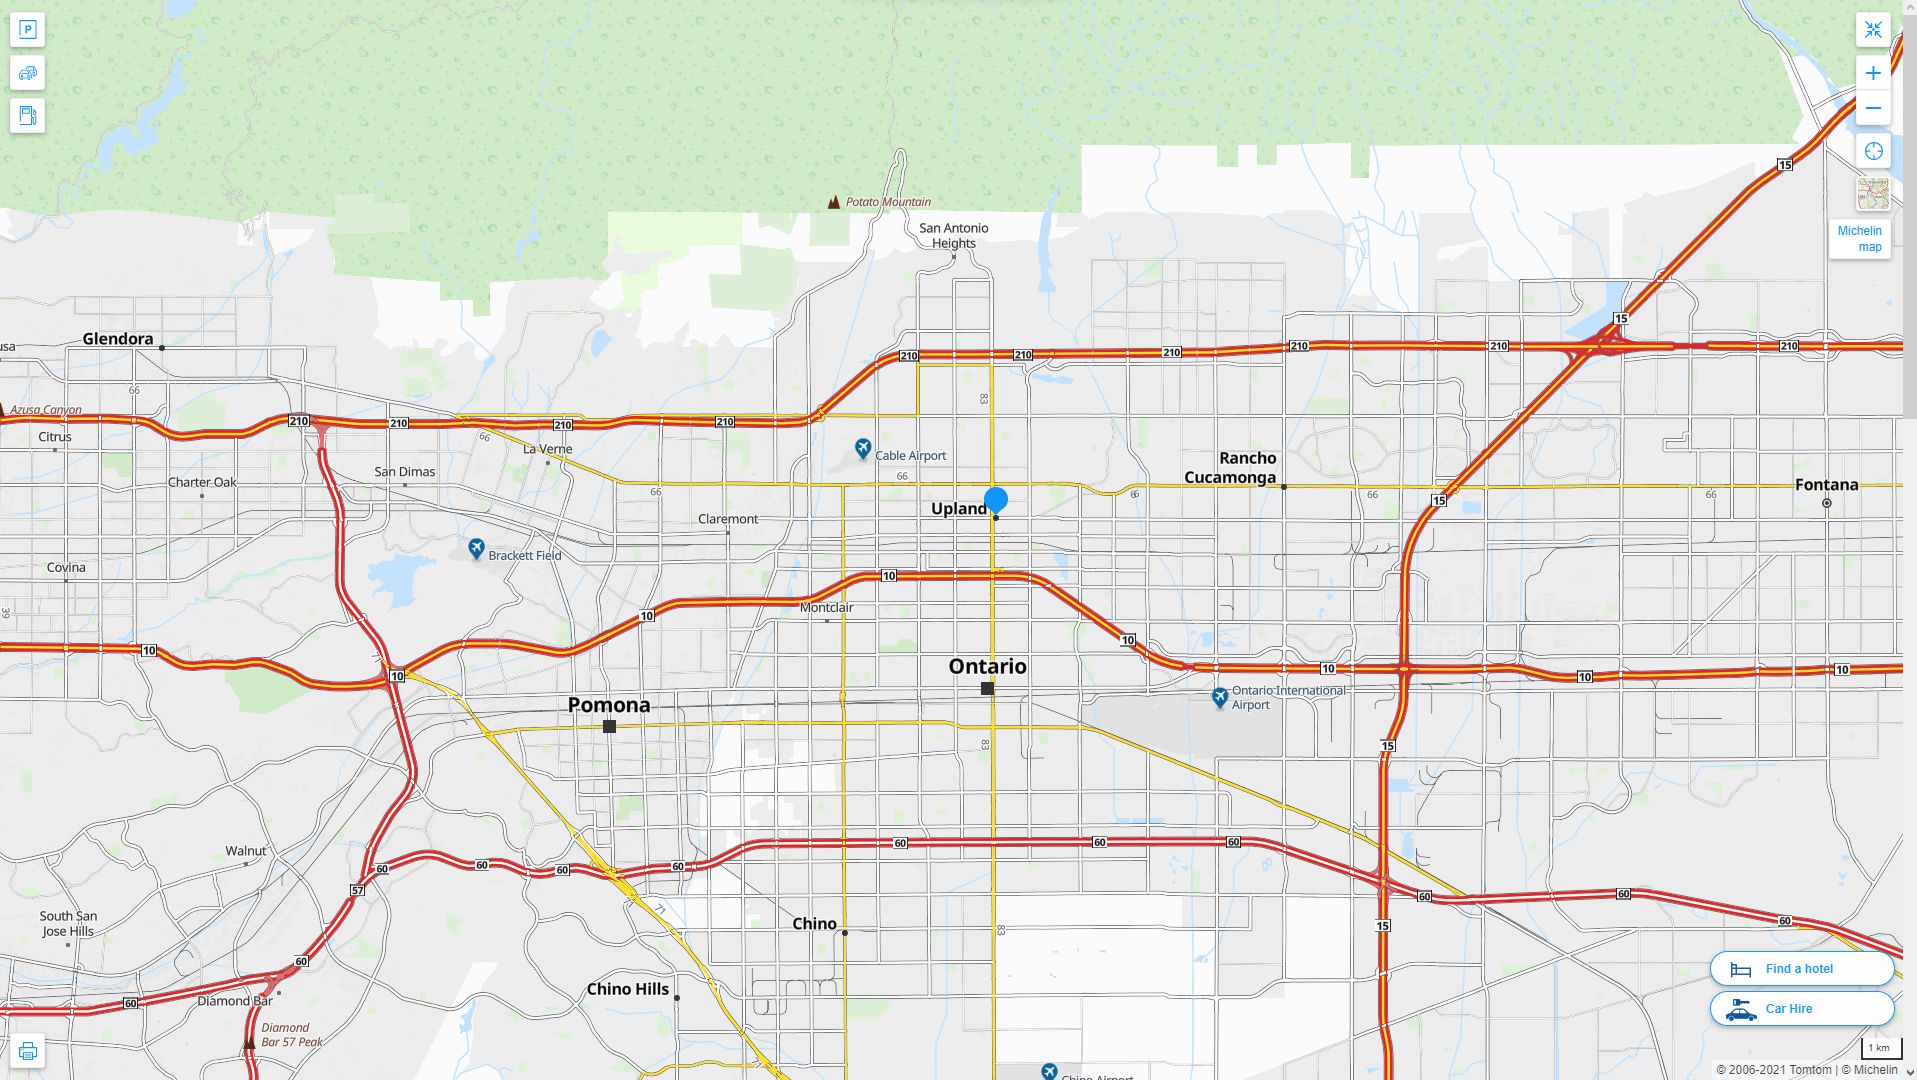 Upland California Highway and Road Map